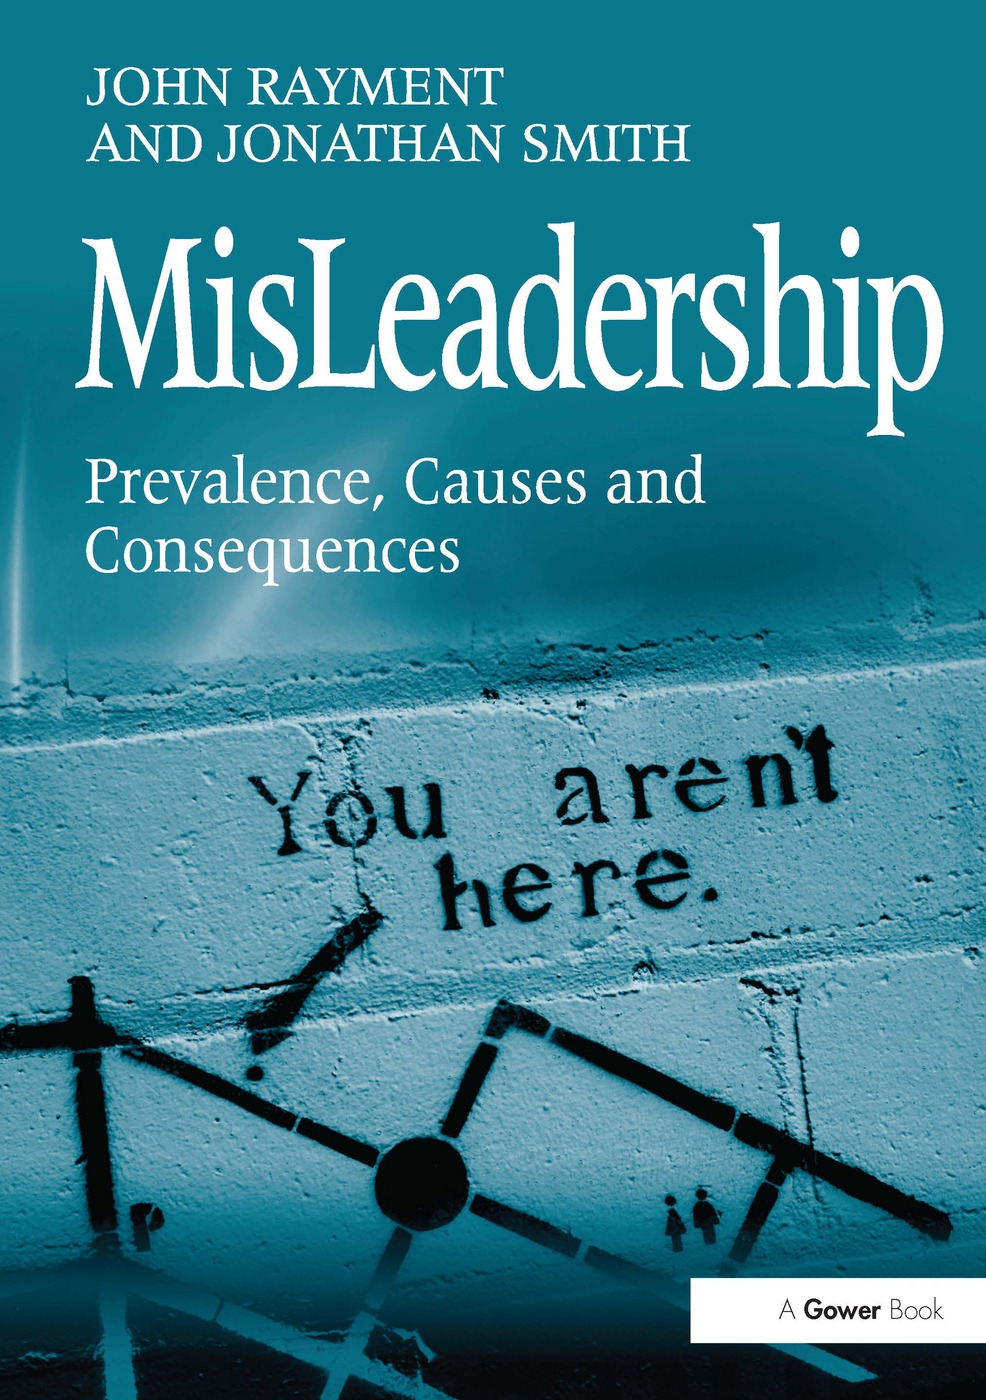 Misleadership: Prevalence, Causes and Consequences